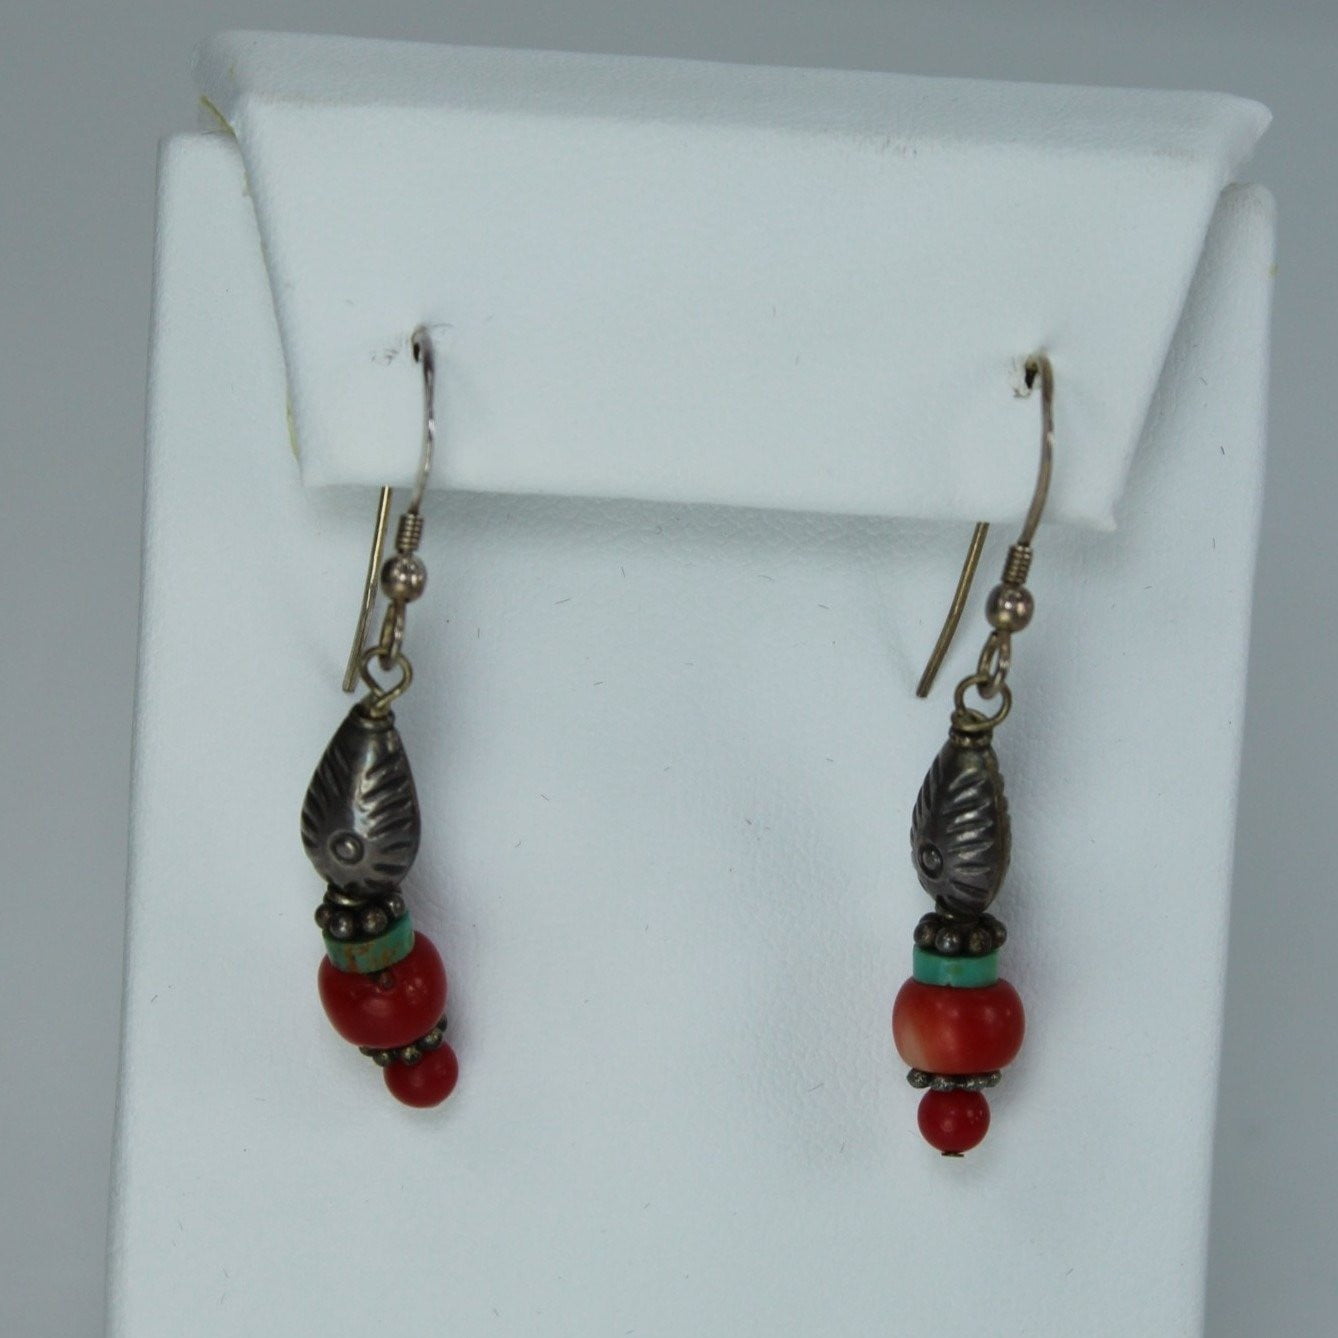 Earrings Turquoise Coral Red Stones Silver Fish Beads Fish Shepherd Hook